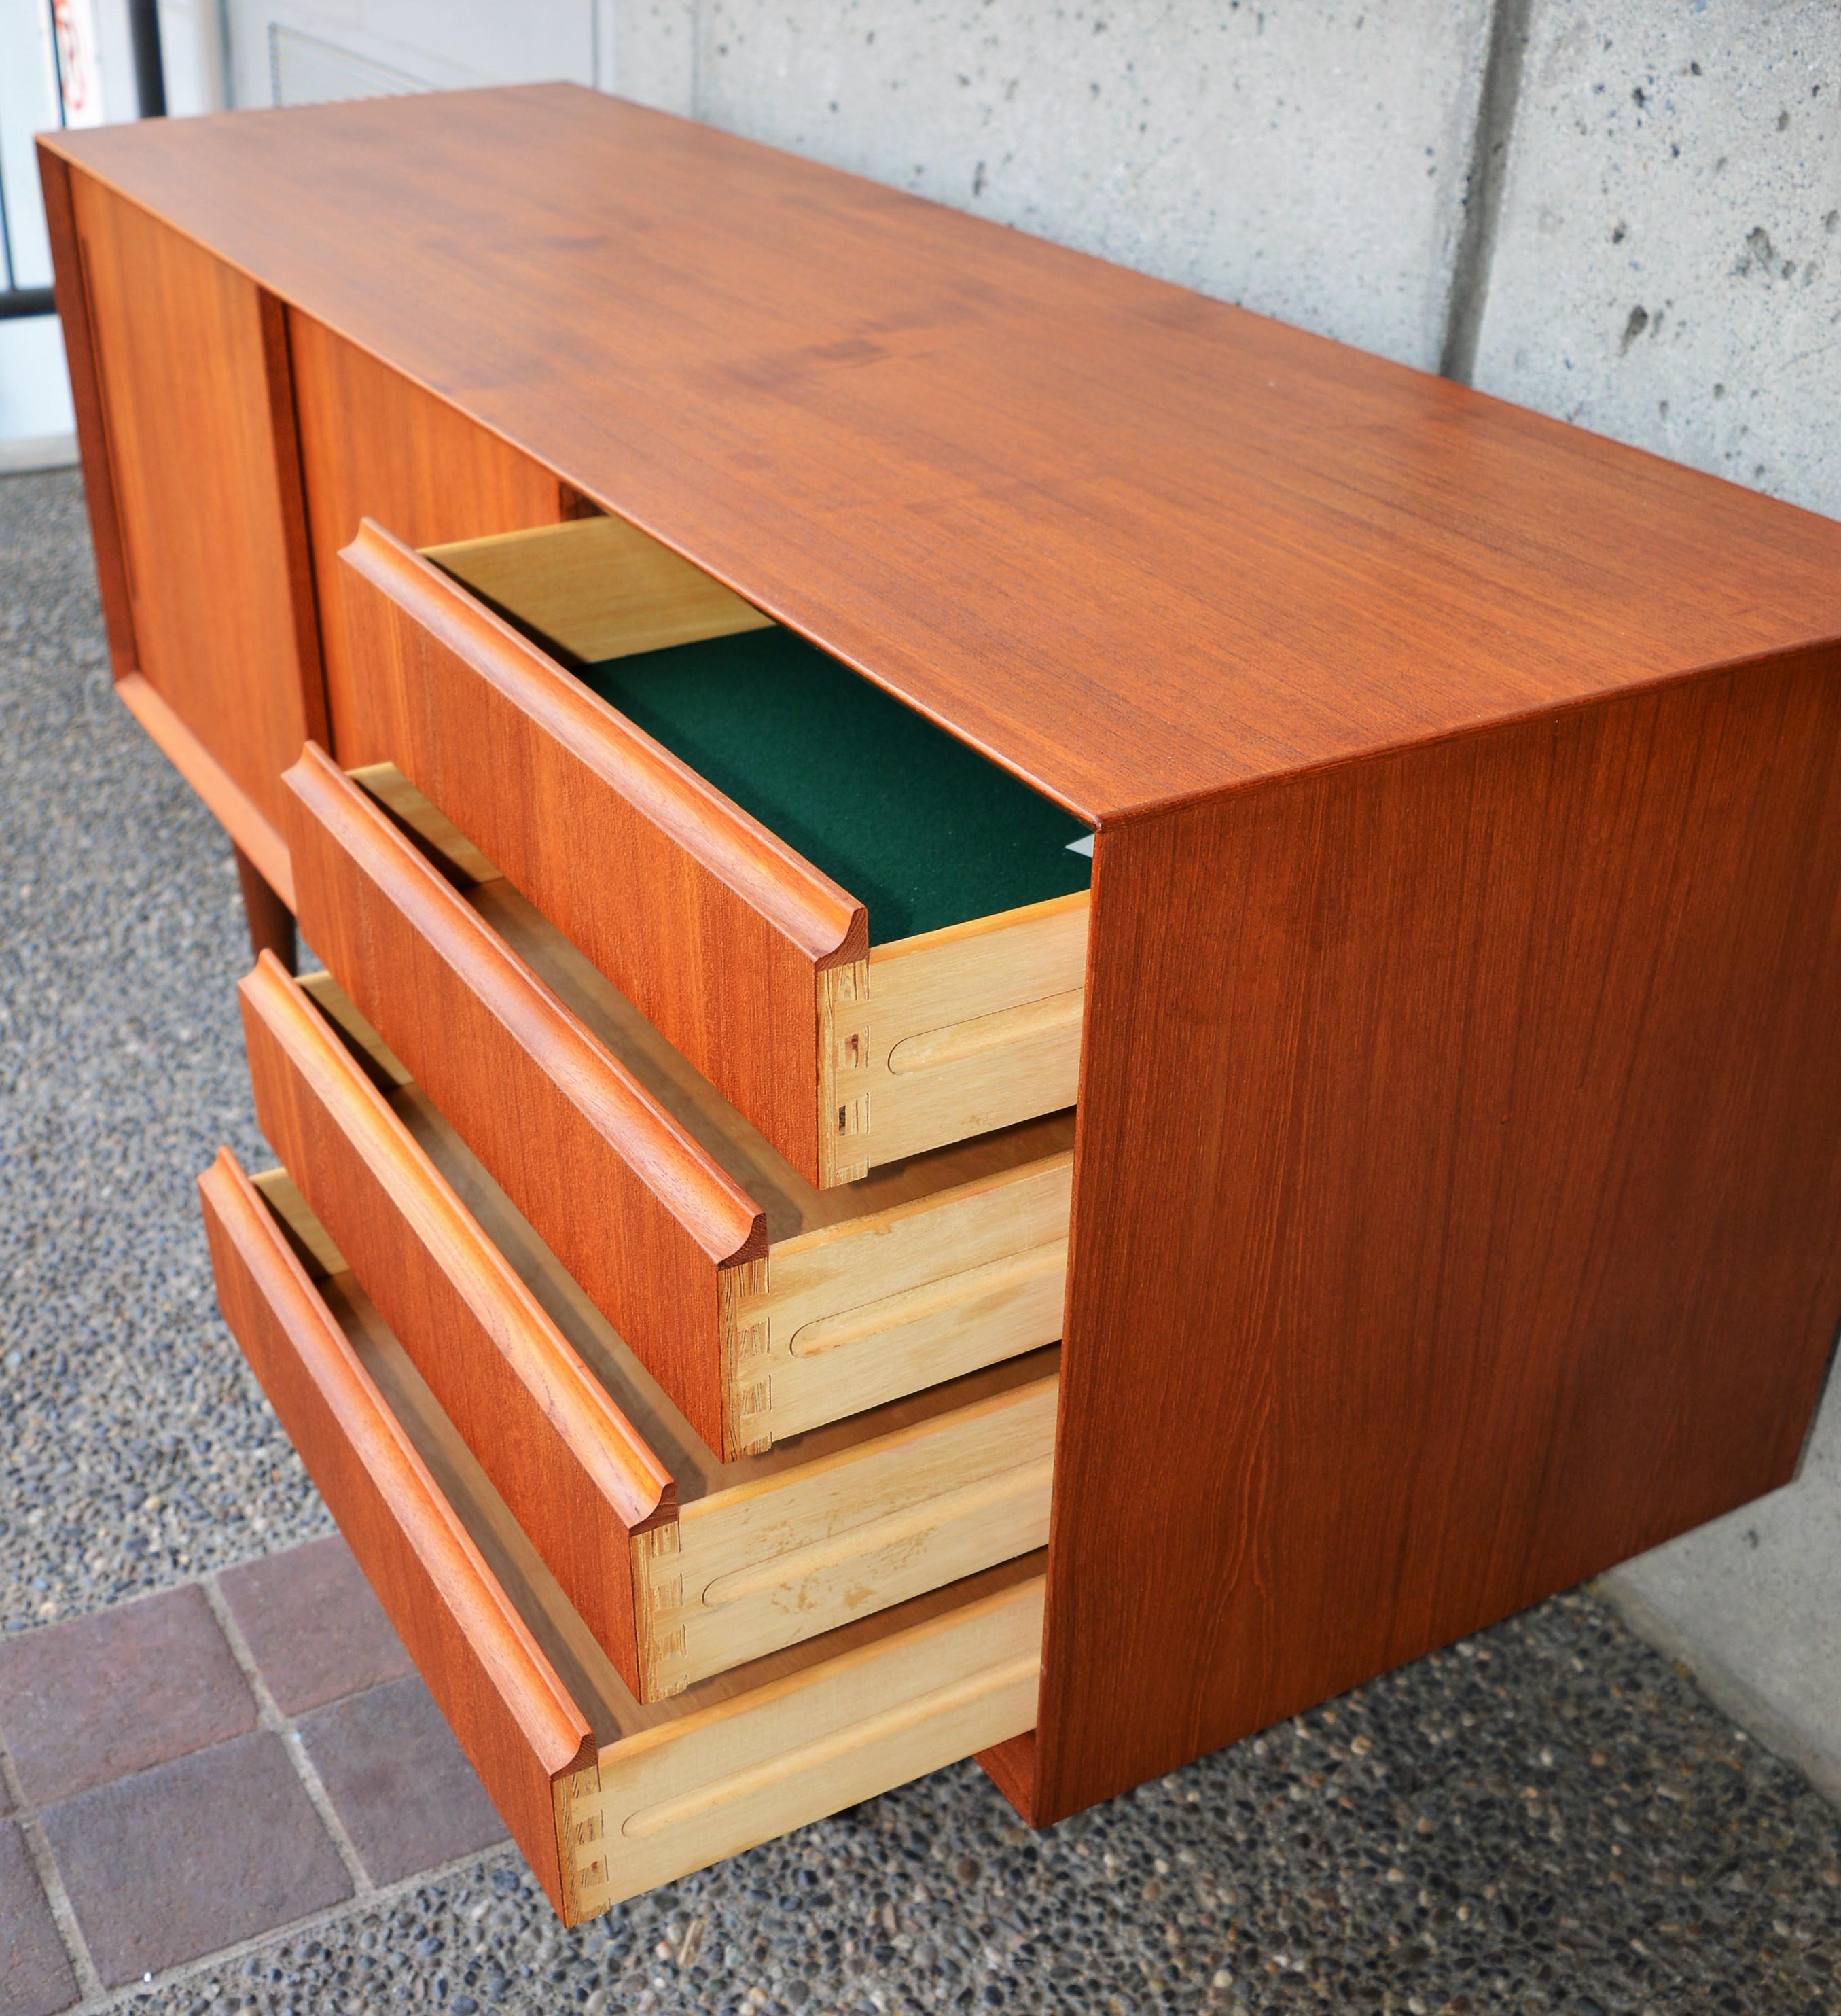 Mid-20th Century Danish Teak Compact Credenza with Left Bank of Drawers & Two Sliders, Alderslyst